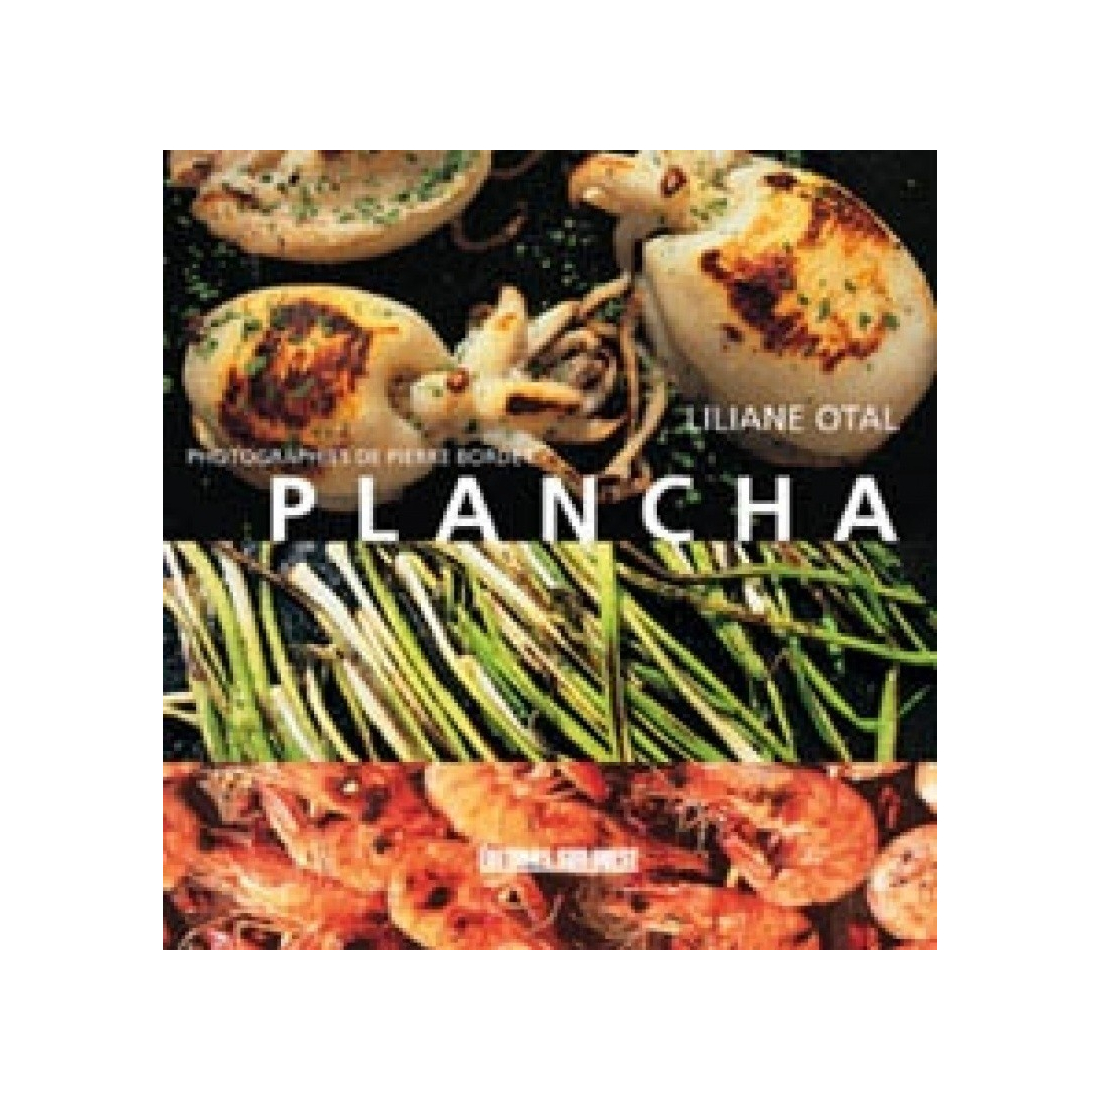 Plancha Editions A17-ED08 Editions and Publications